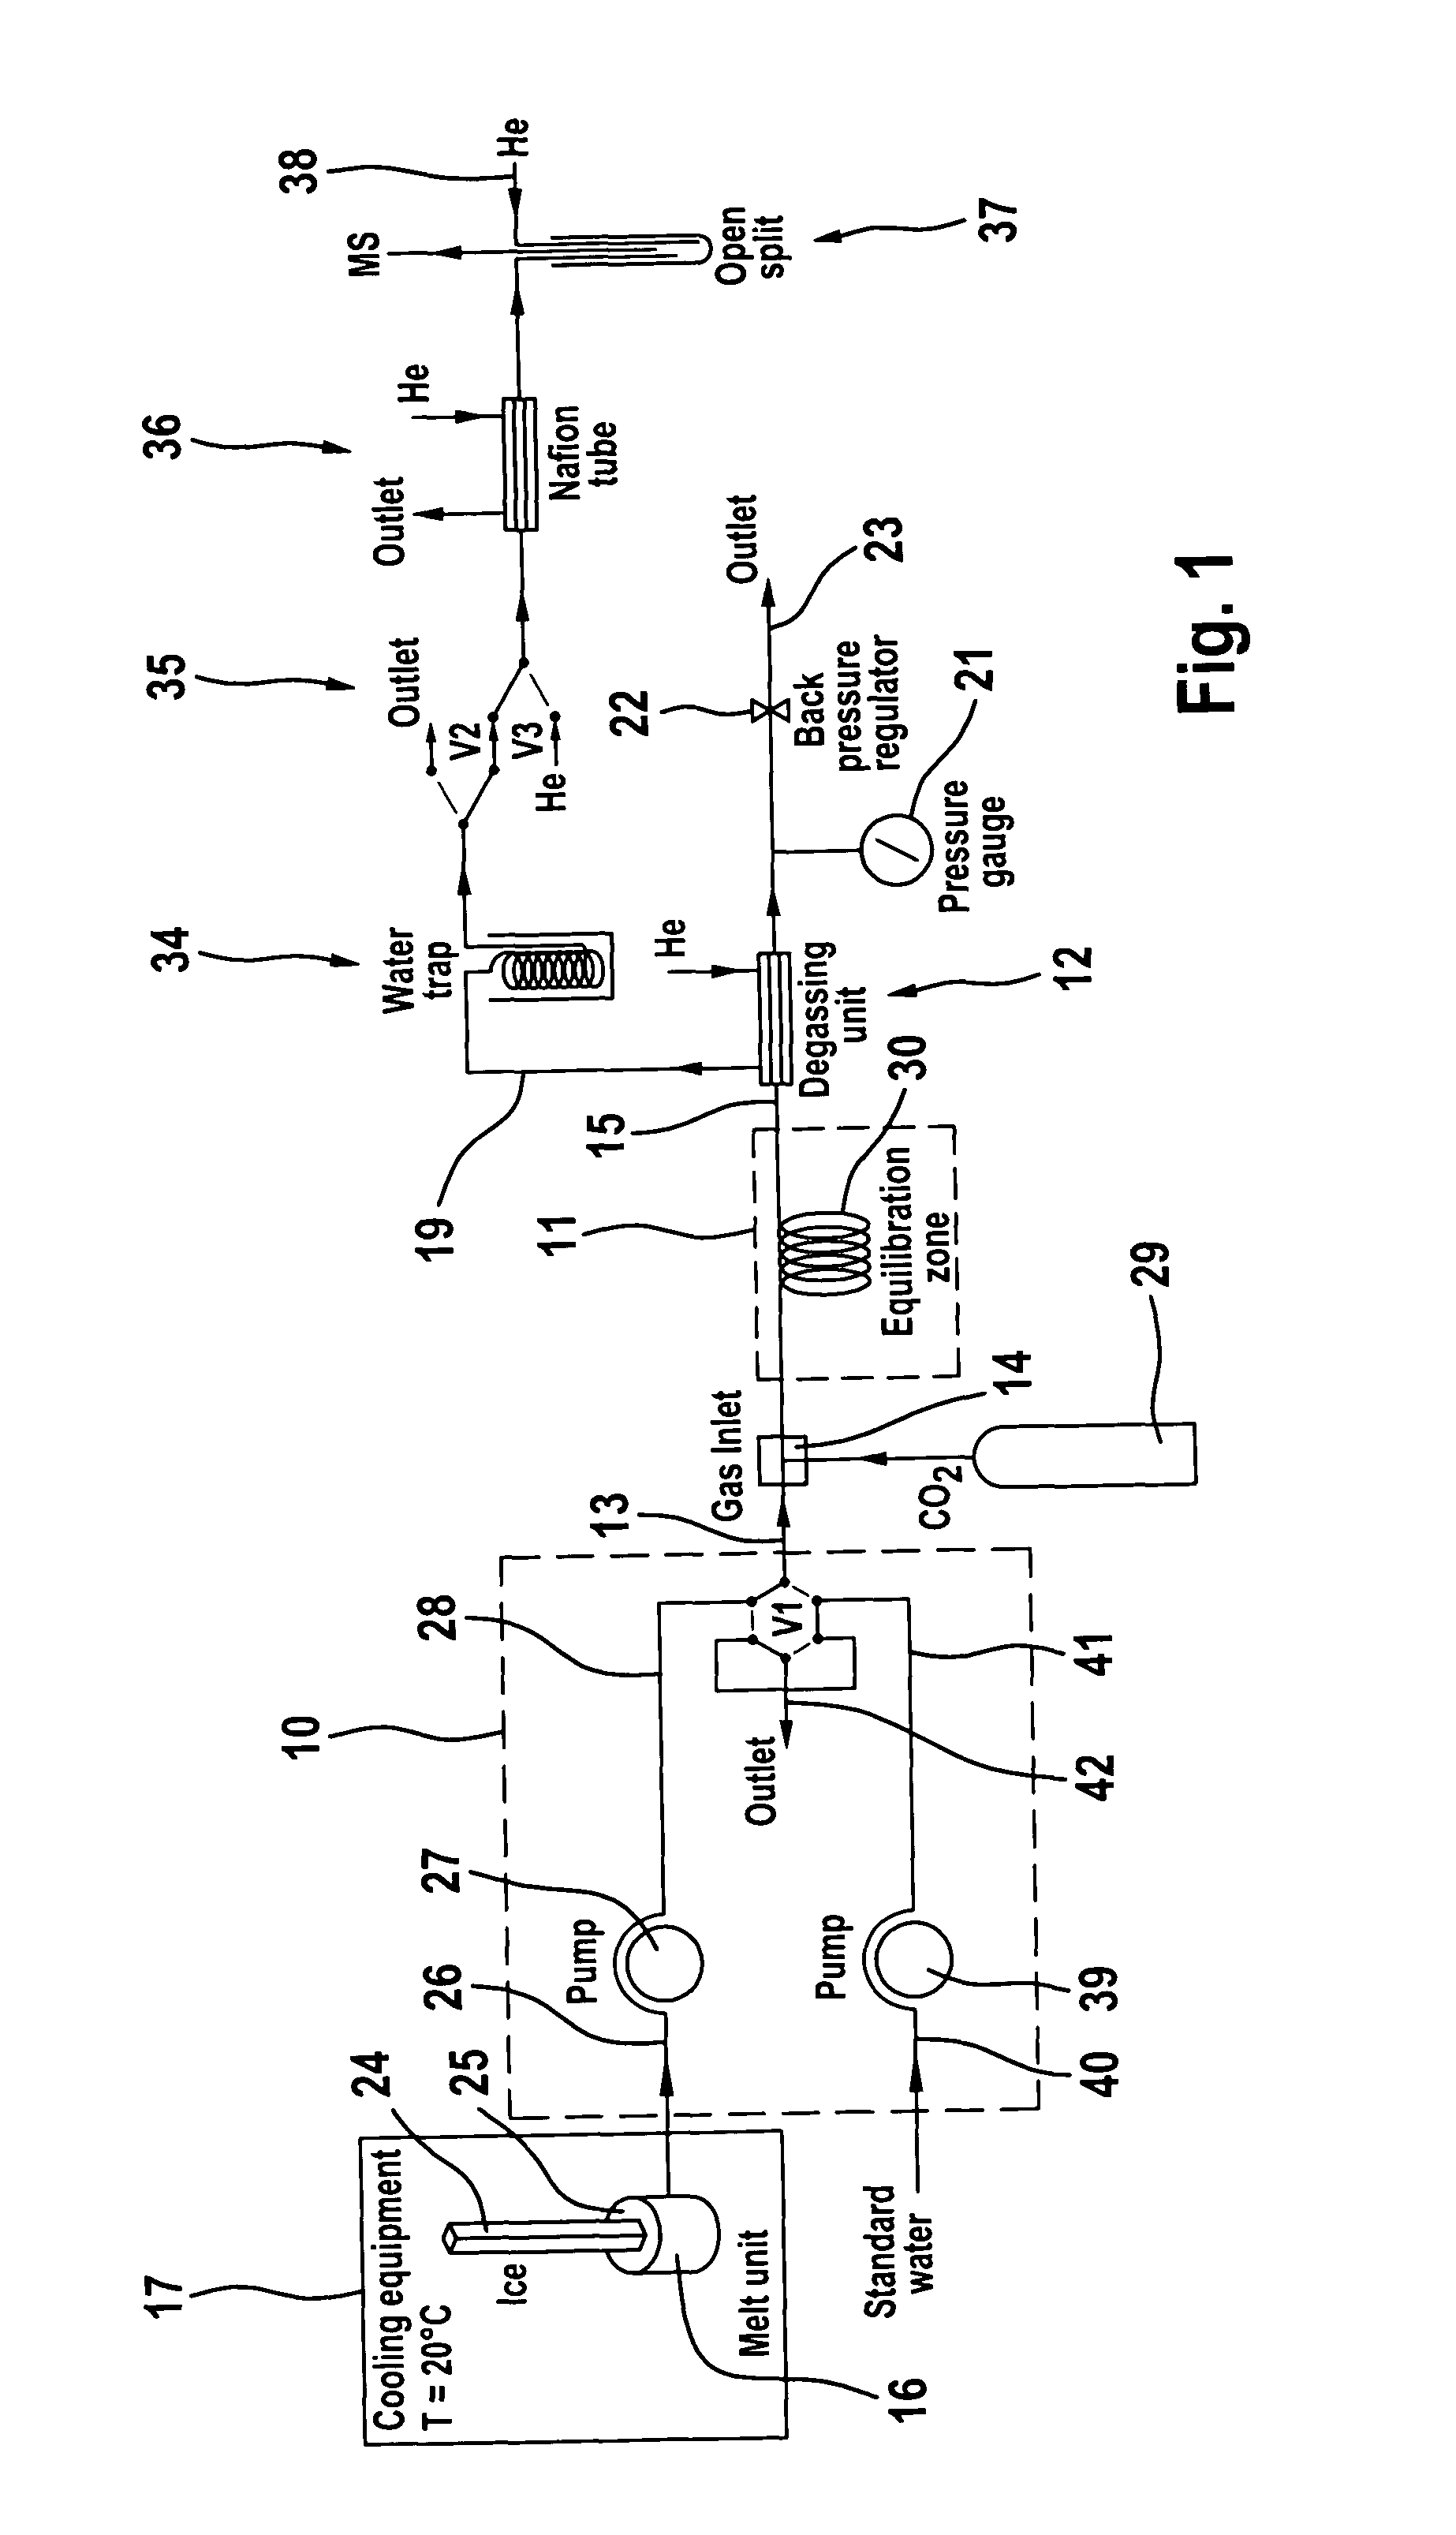 Process and apparatus for providing a gaseous substance for the analysis of chemical elements or compounds